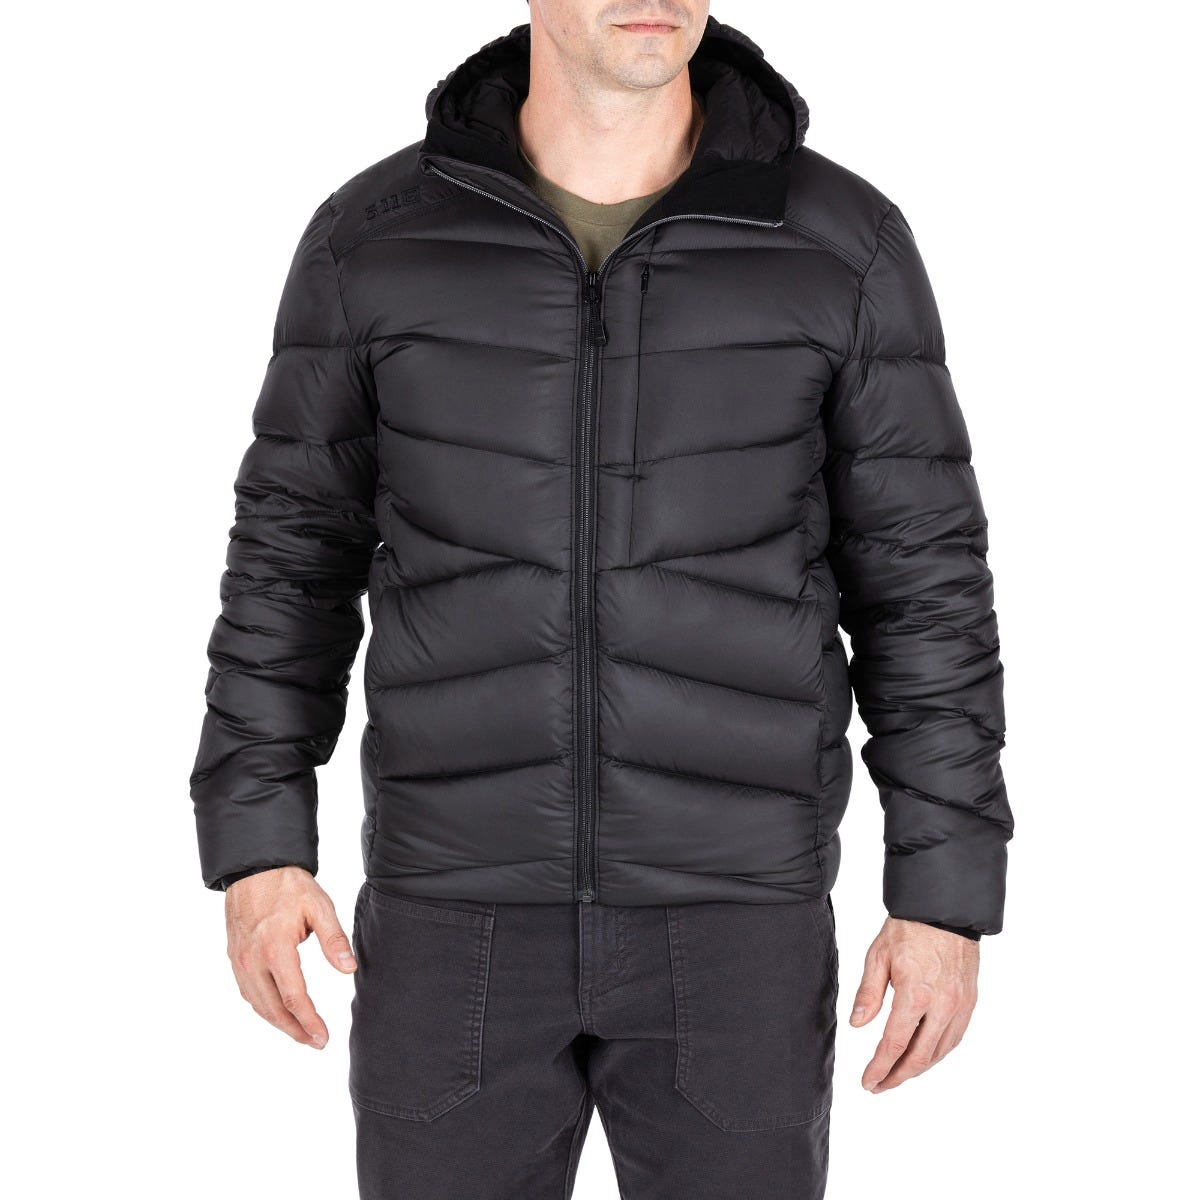 Acadia Down Jacket - Ultimate Insulated Protection | 5.11 Tactical®